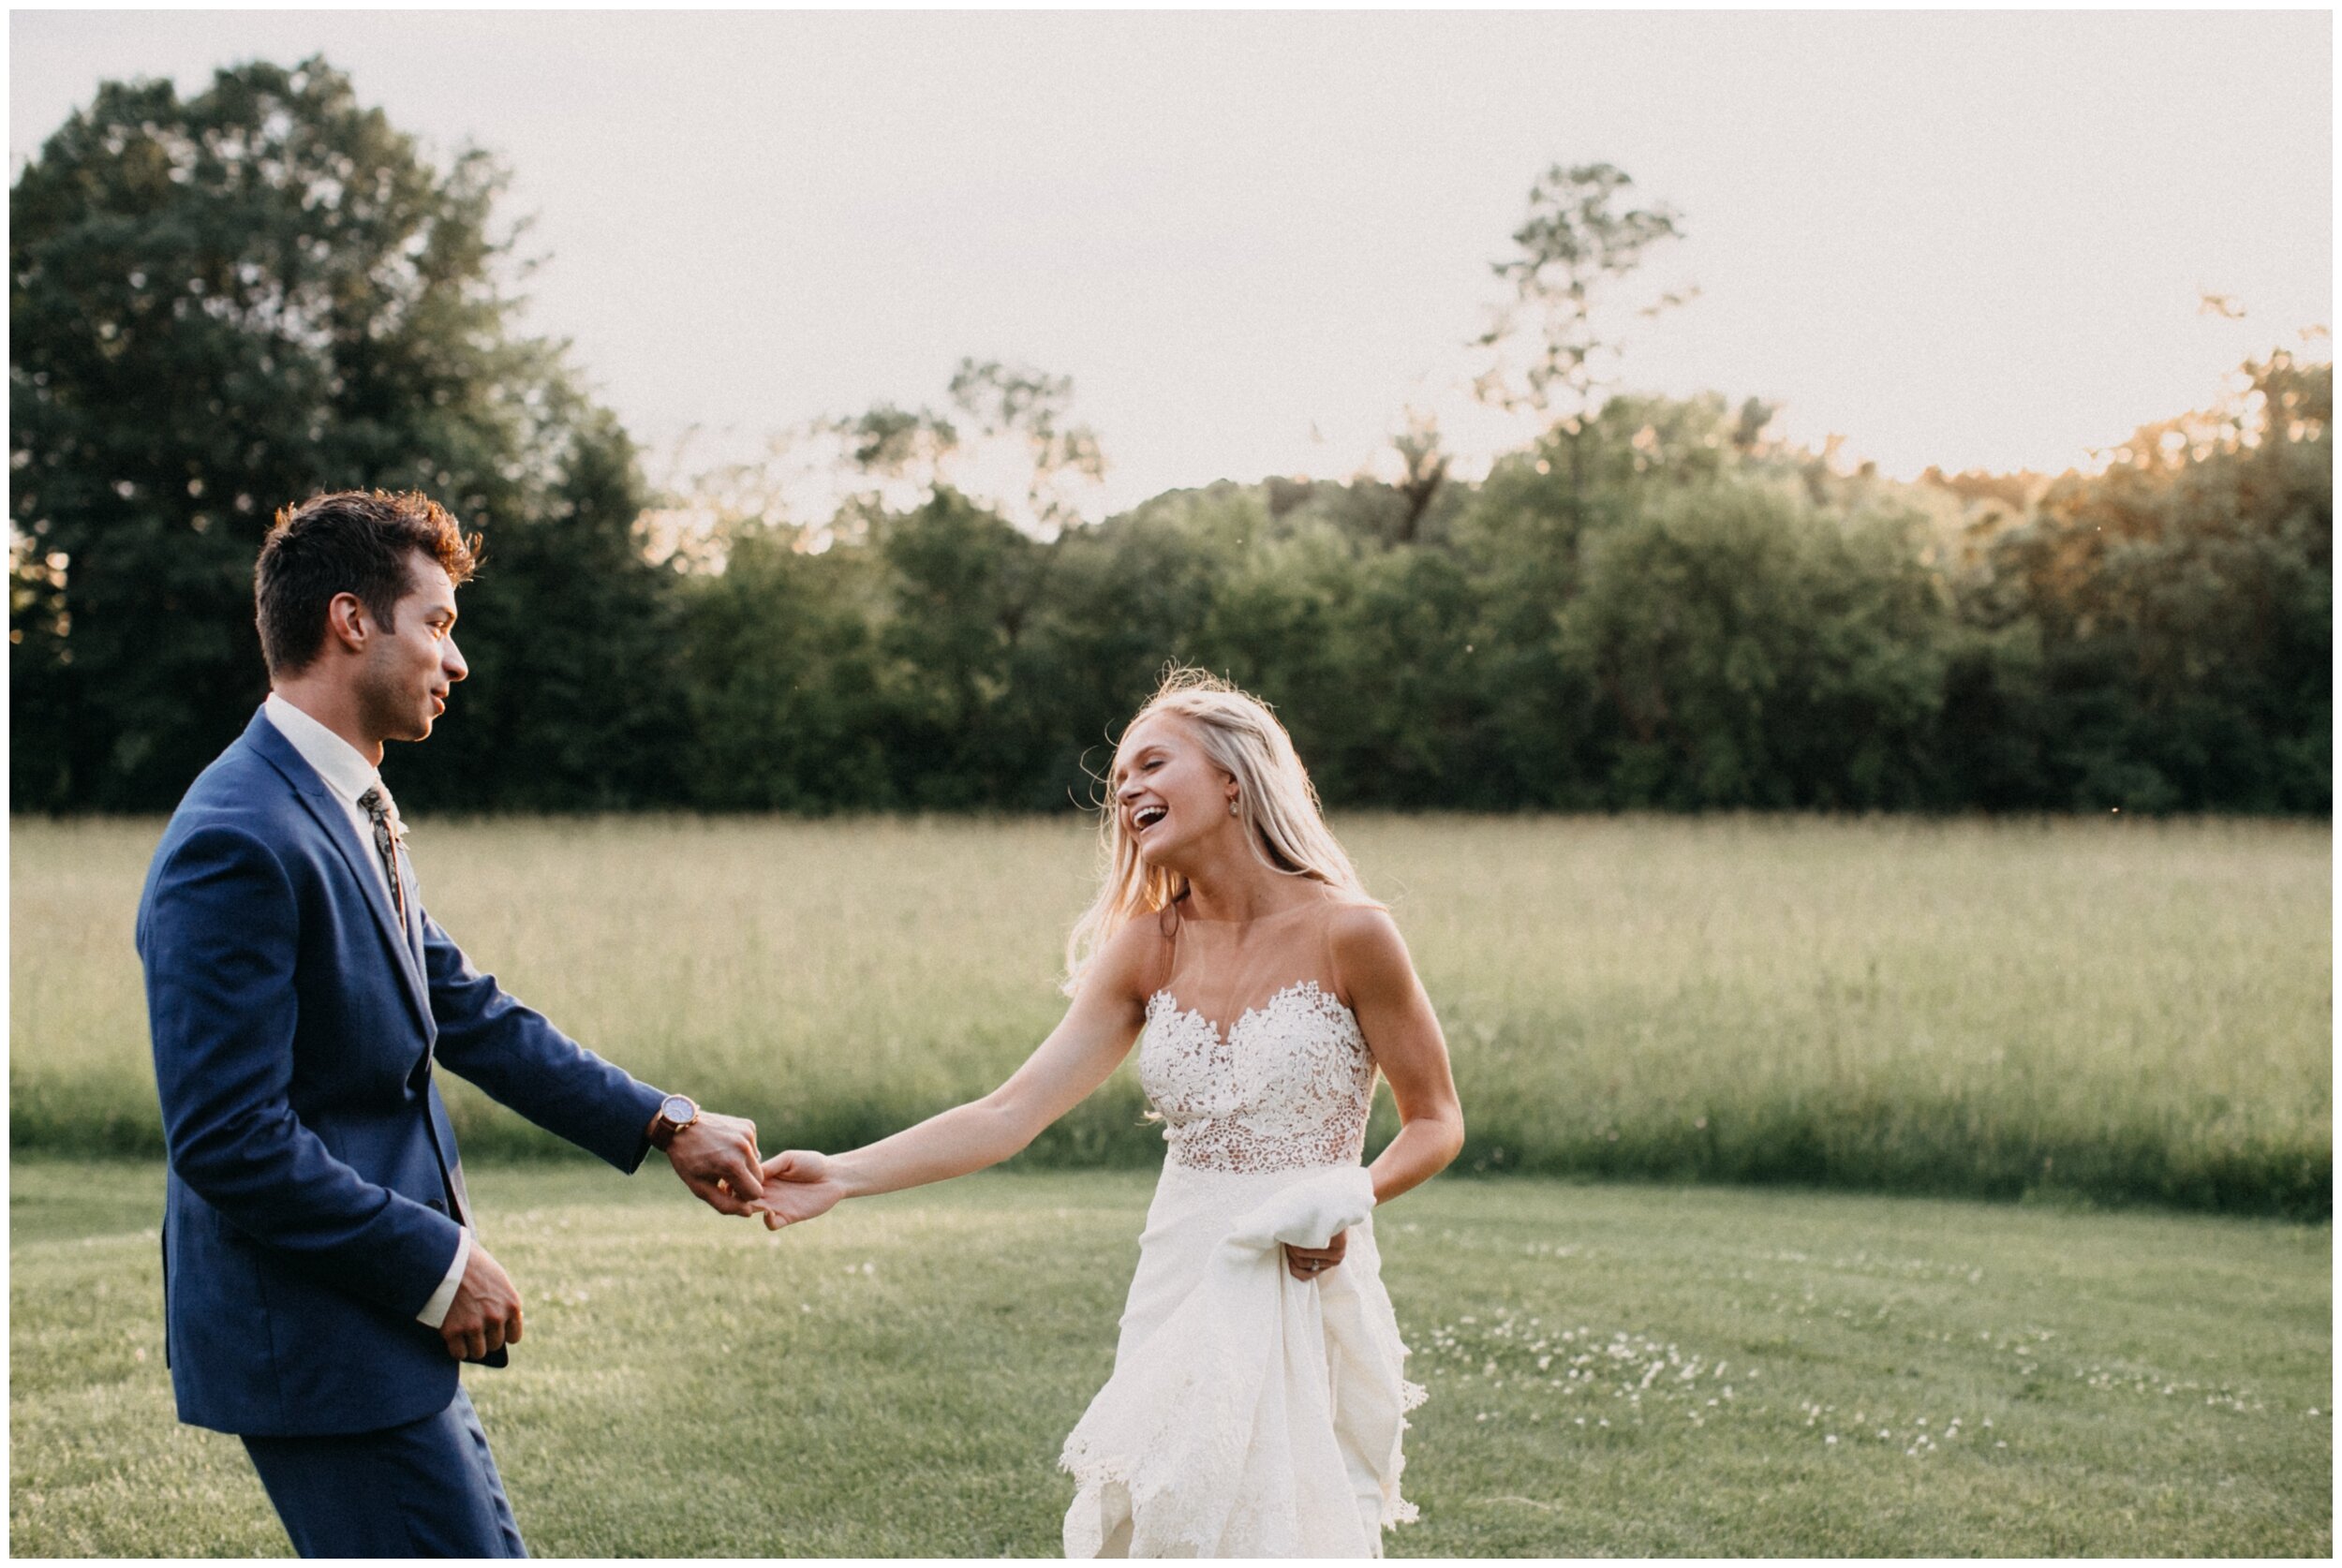 Bride and groom dancing in field during sunset at Minnesota barn wedding 